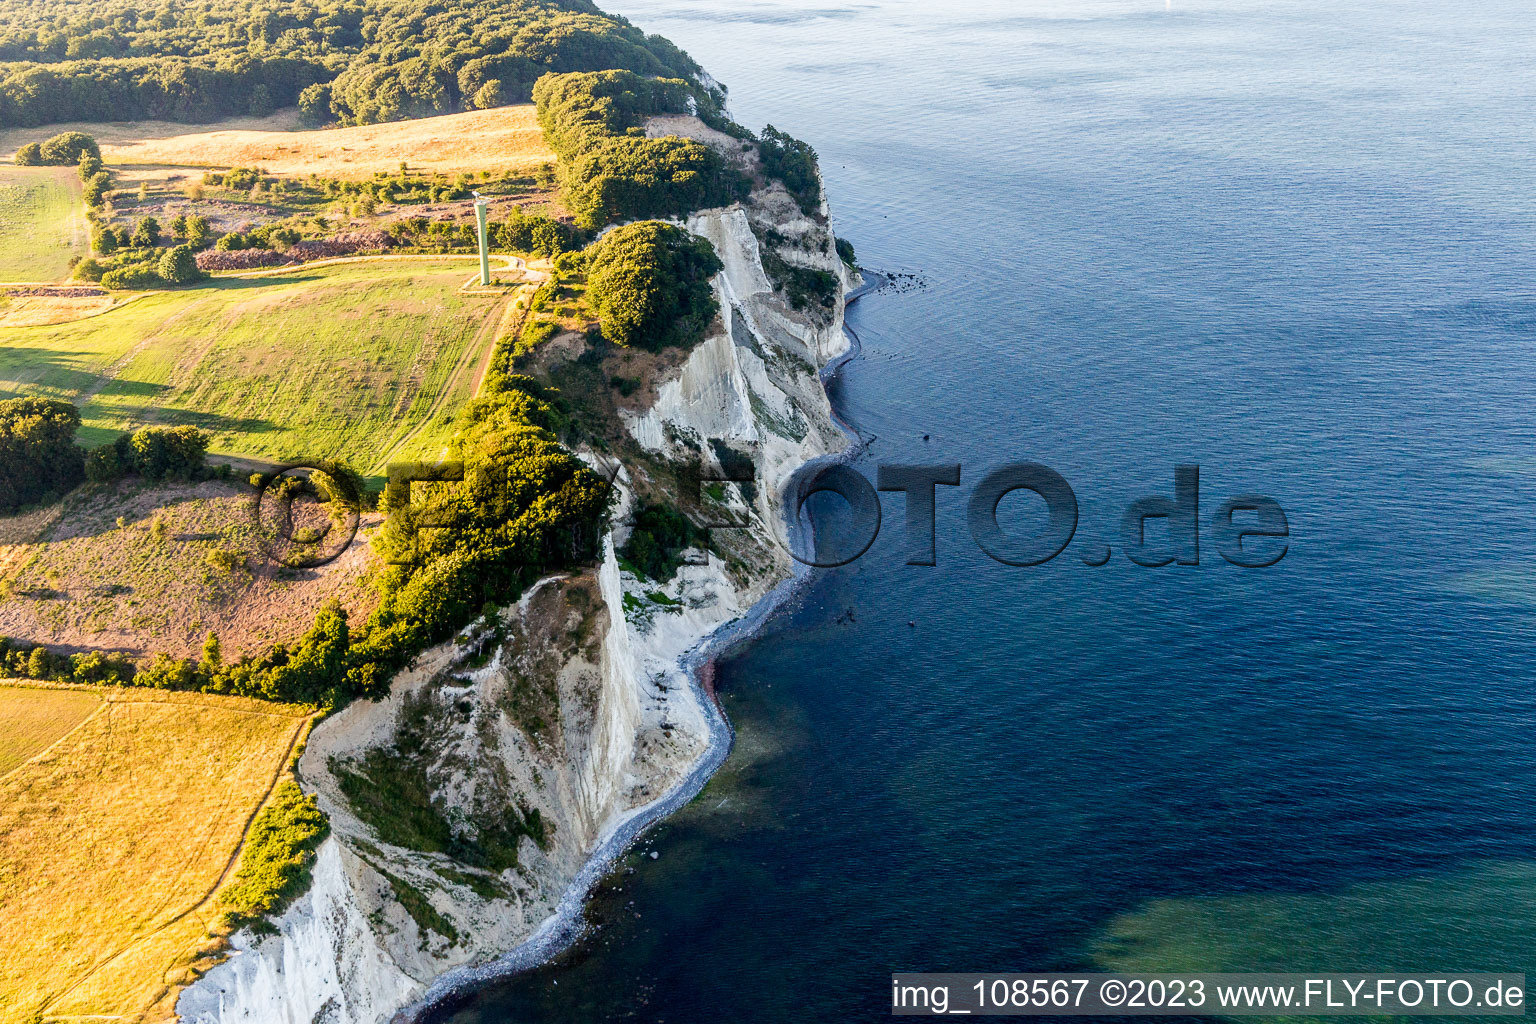 Drone image of Borre in the state Zealand, Denmark